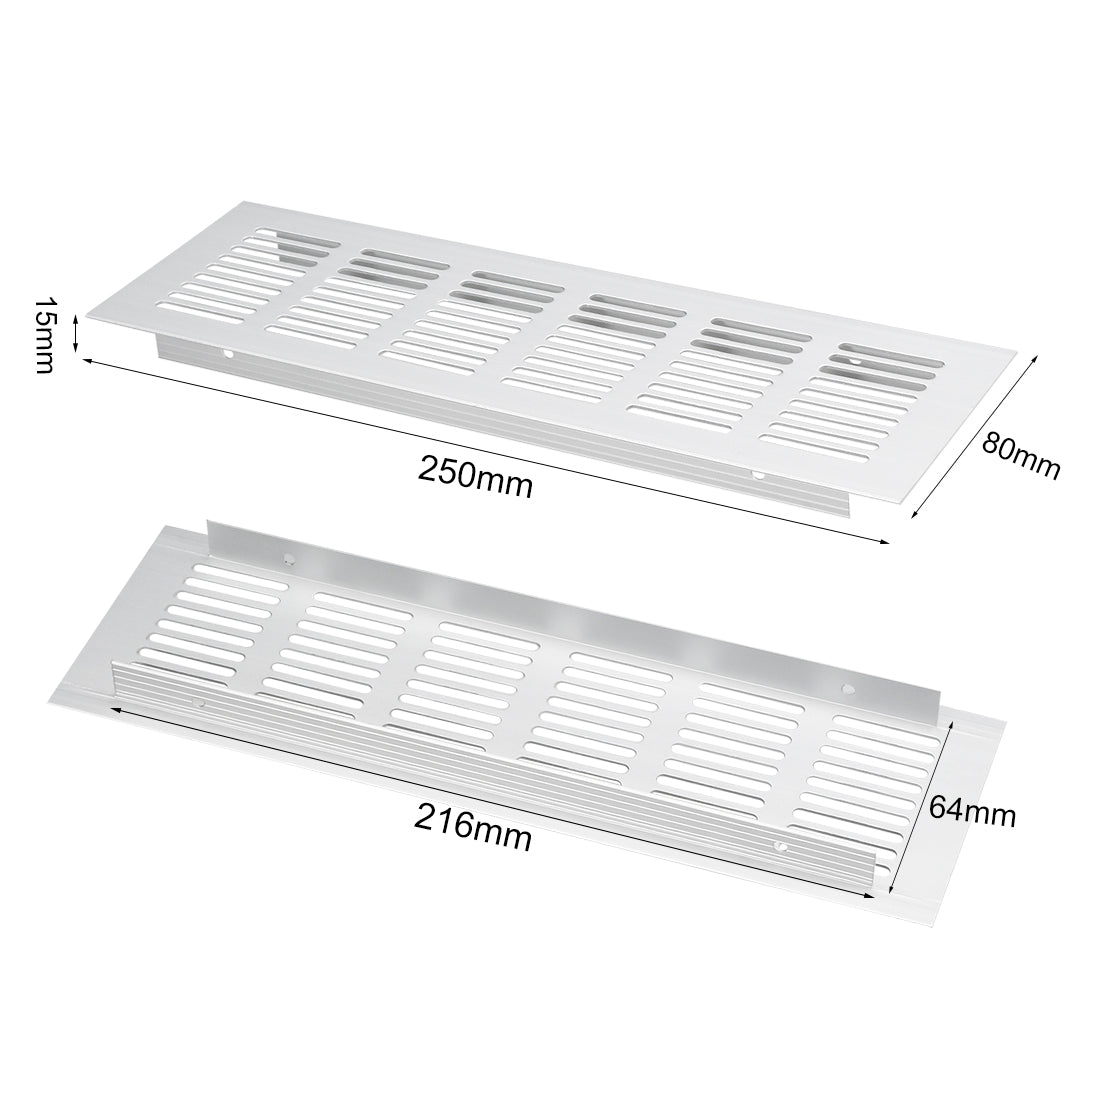 uxcell Uxcell 250mmx80mm, Ventilation Grille, Aluminum Alloy Air Vent Louvered Grill Cover 2pcs